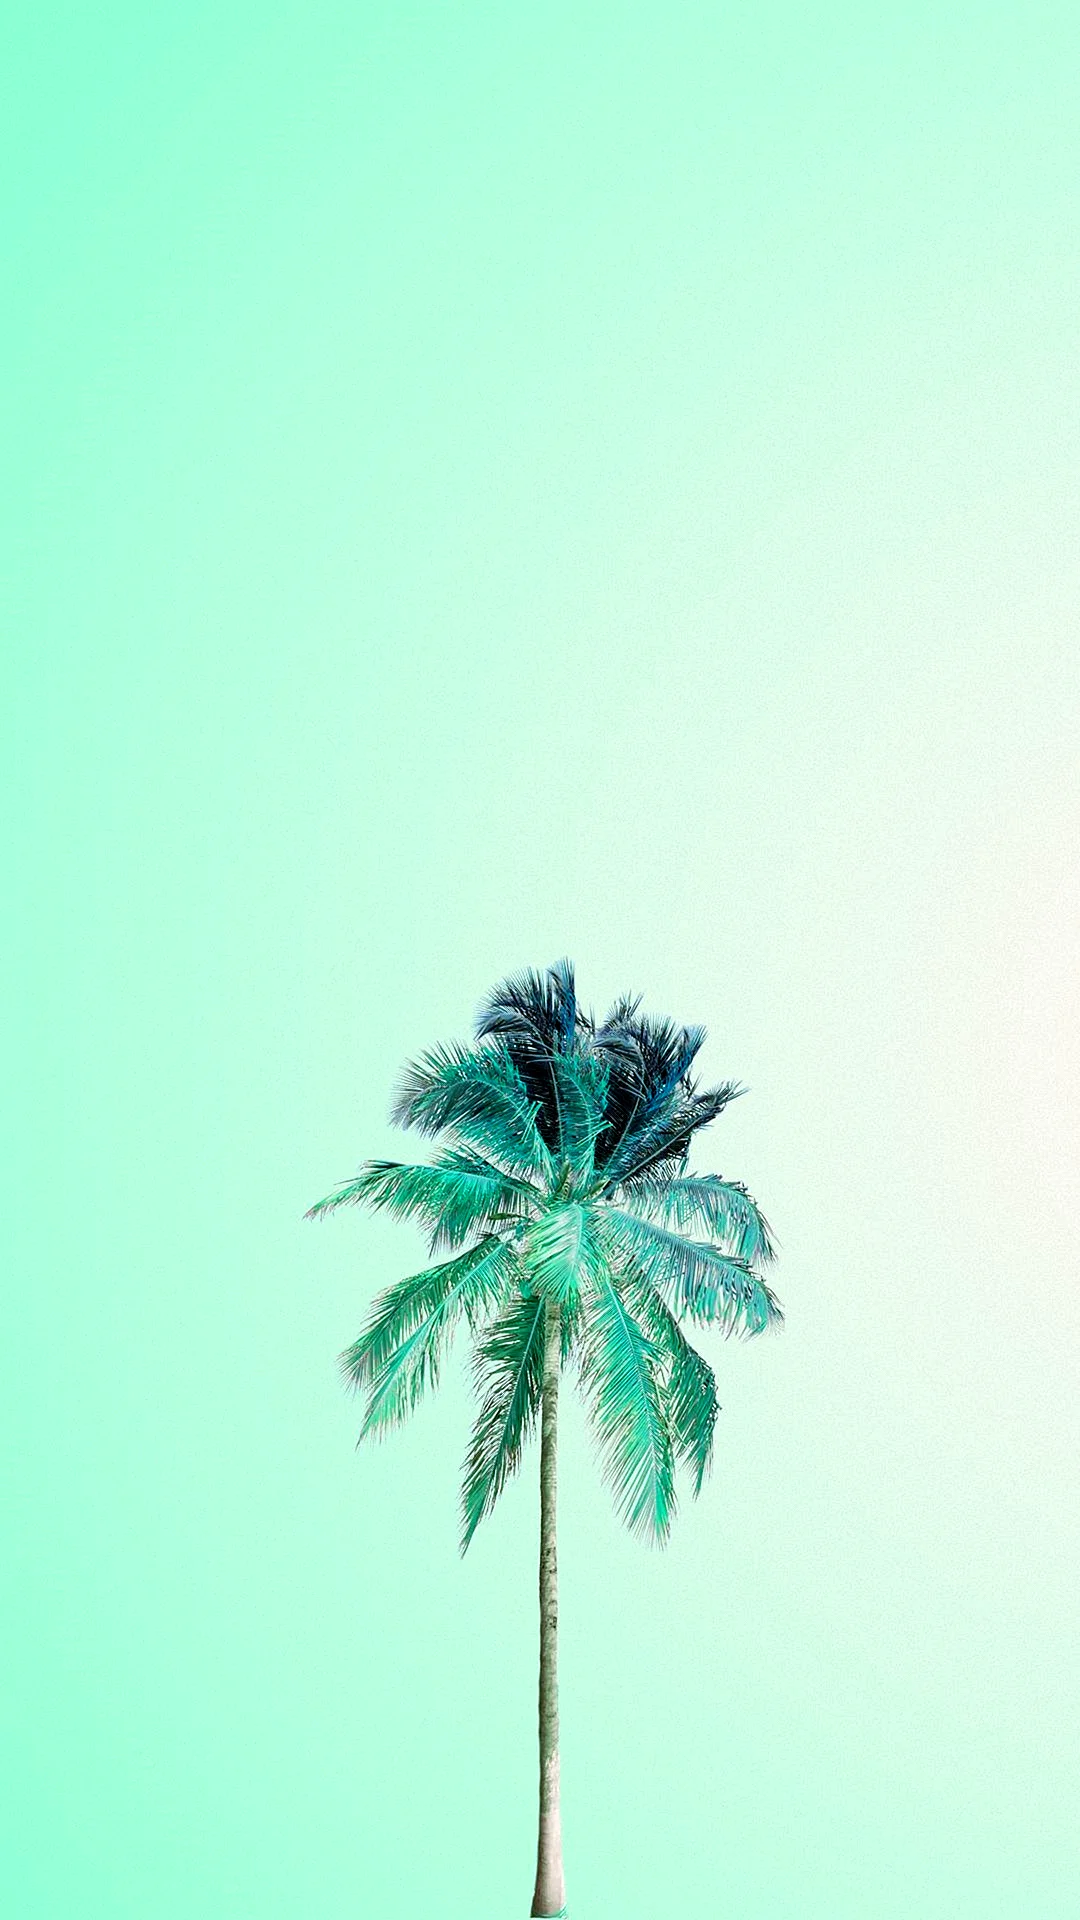 Aesthetic iPhone Wallpaper For iPhone